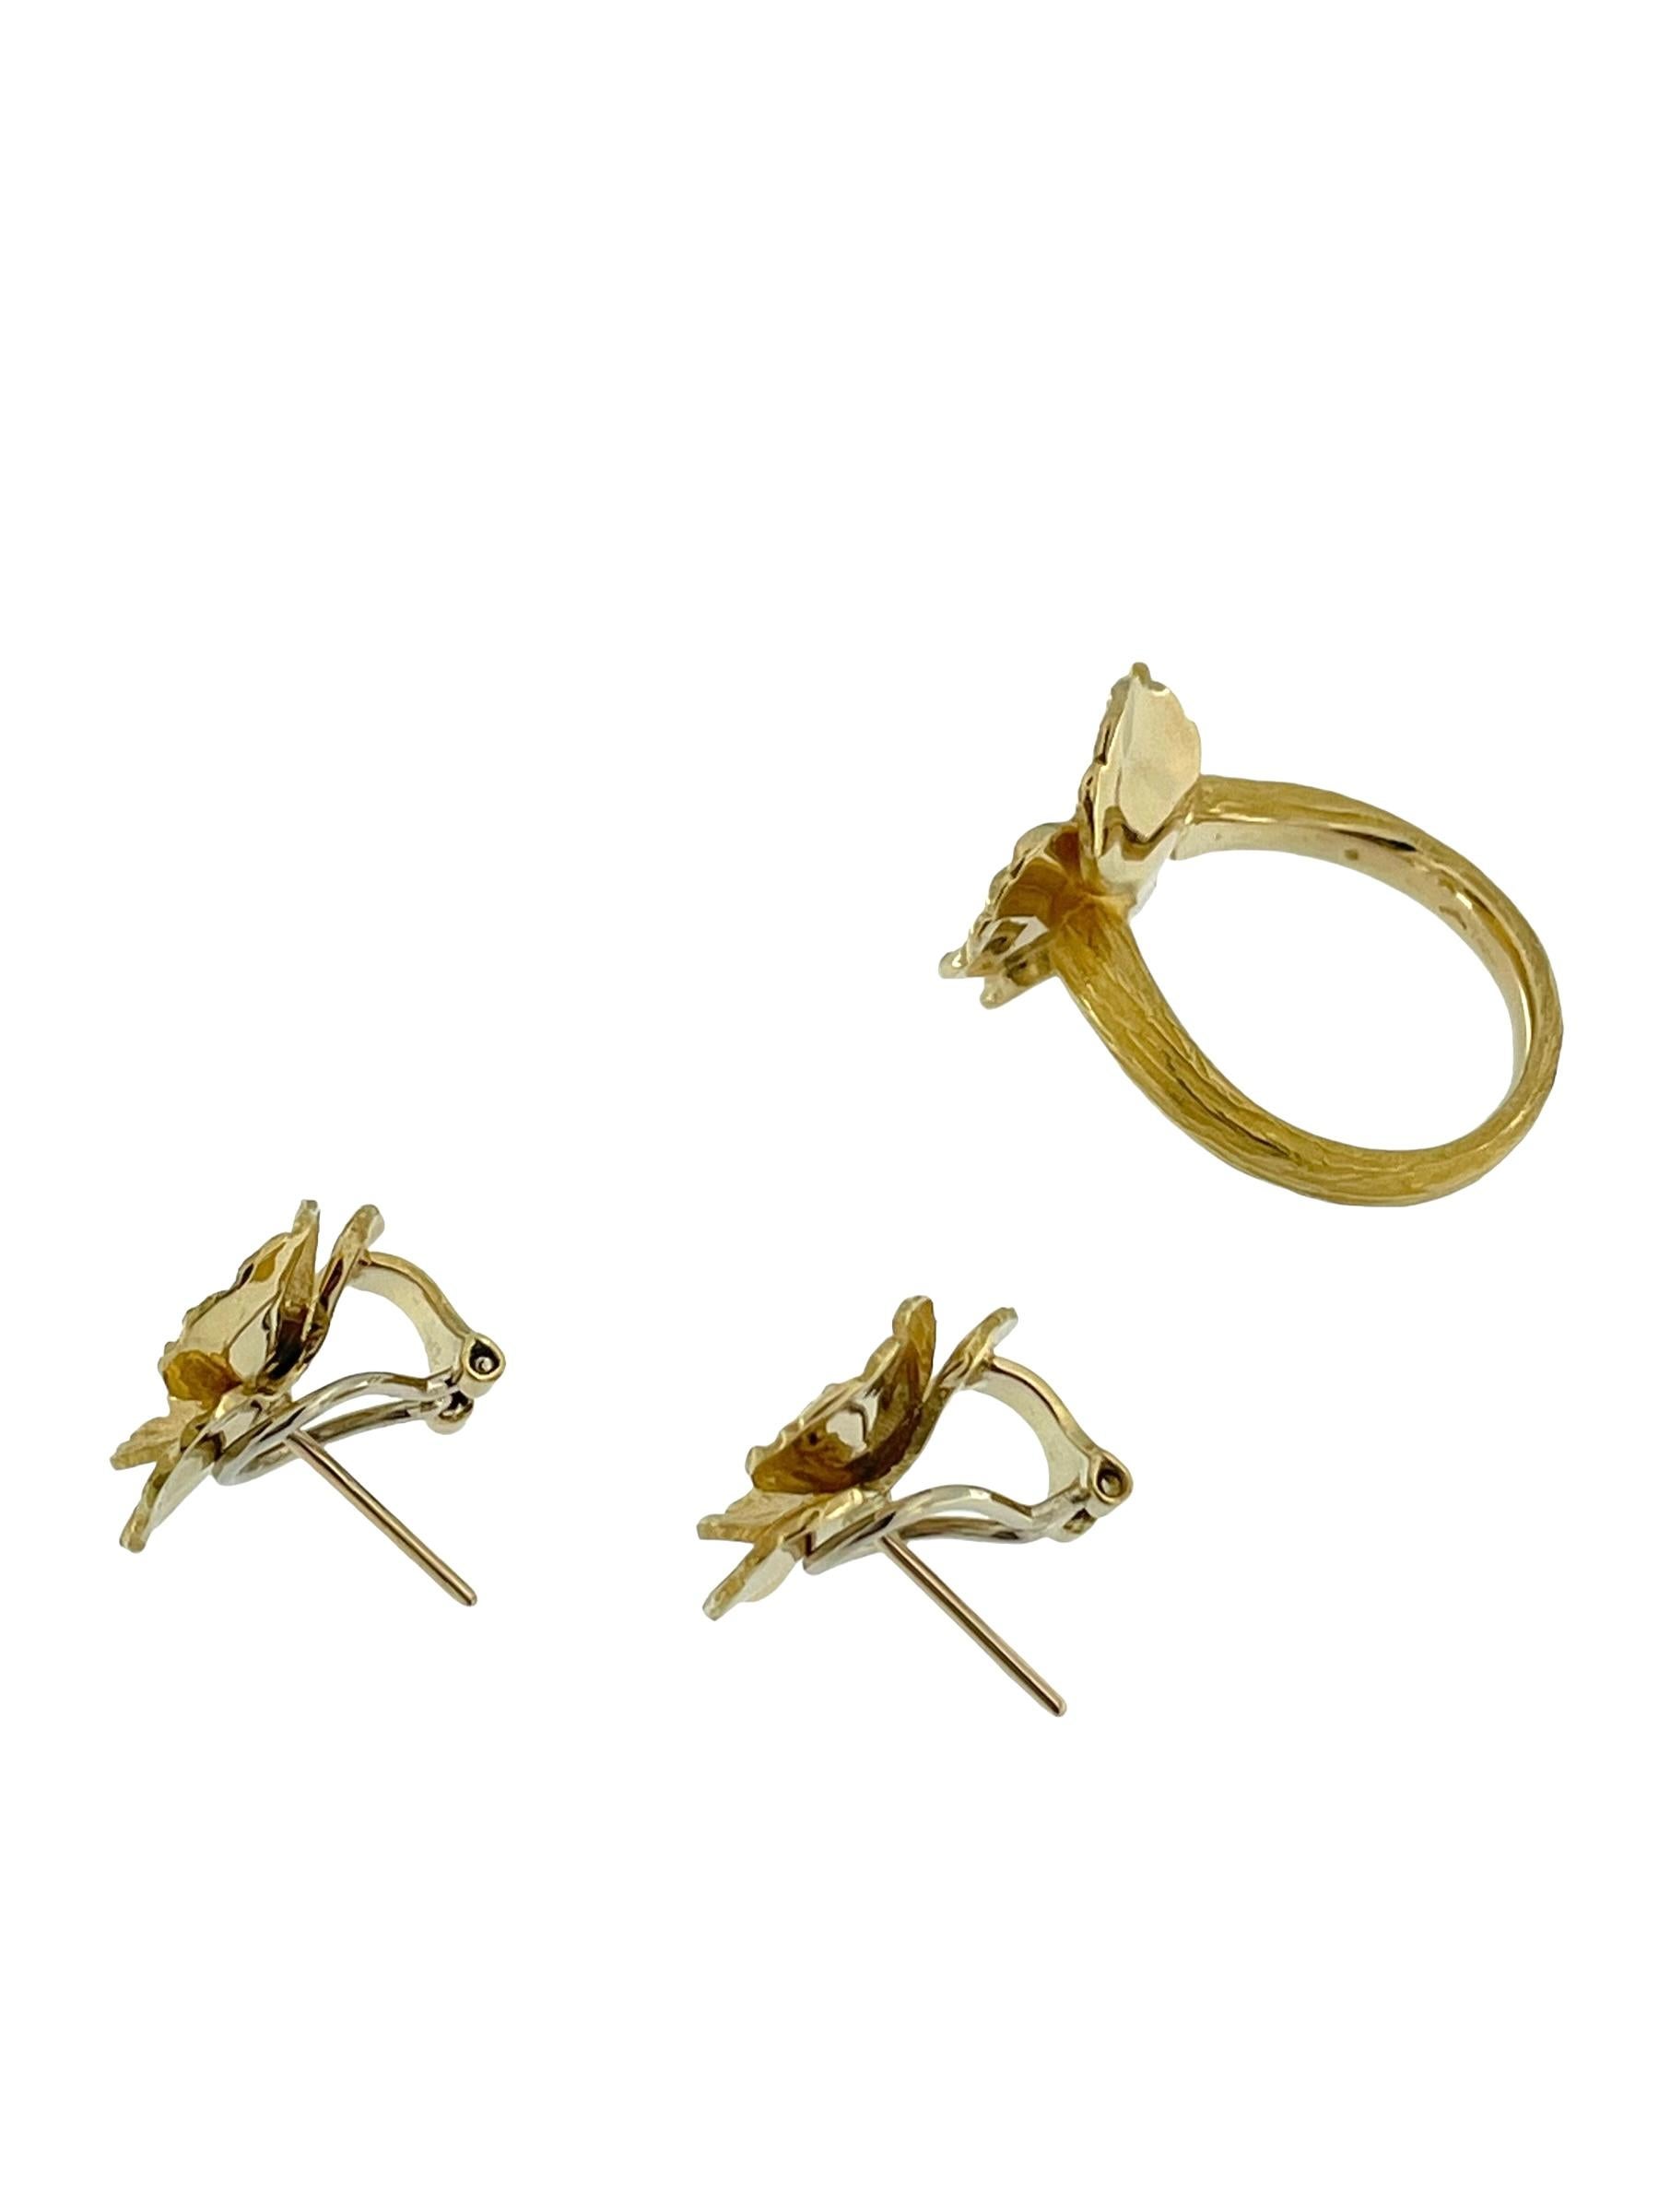 HRD Certified Yellow Gold Flower Set Ring and Earrings with Diamonds For Sale 2